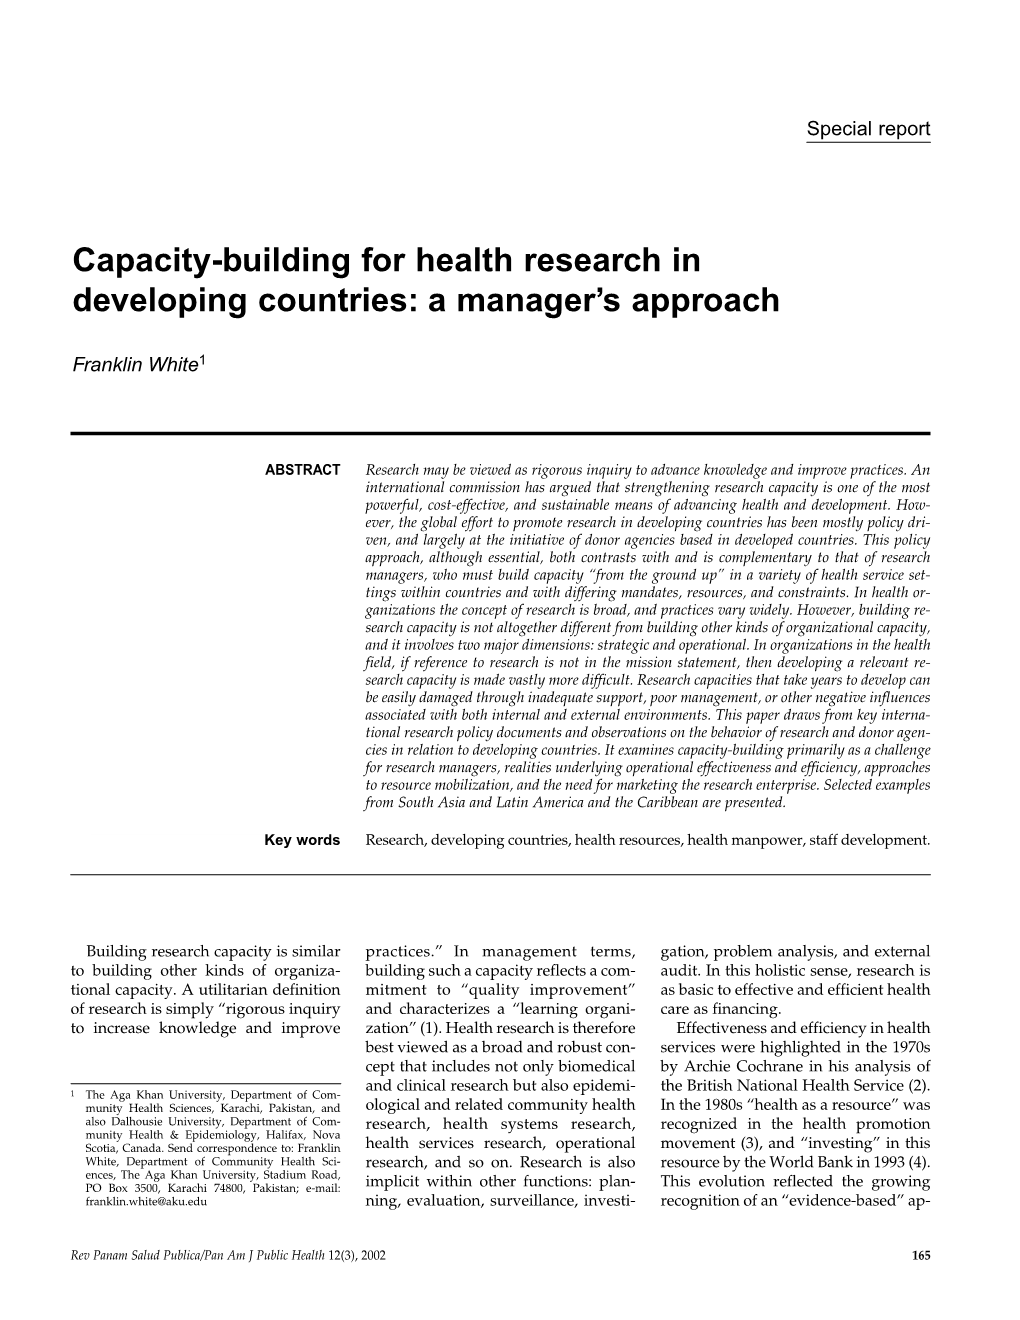 Capacity-Building for Health Research in Developing Countries: a Manager’S Approach